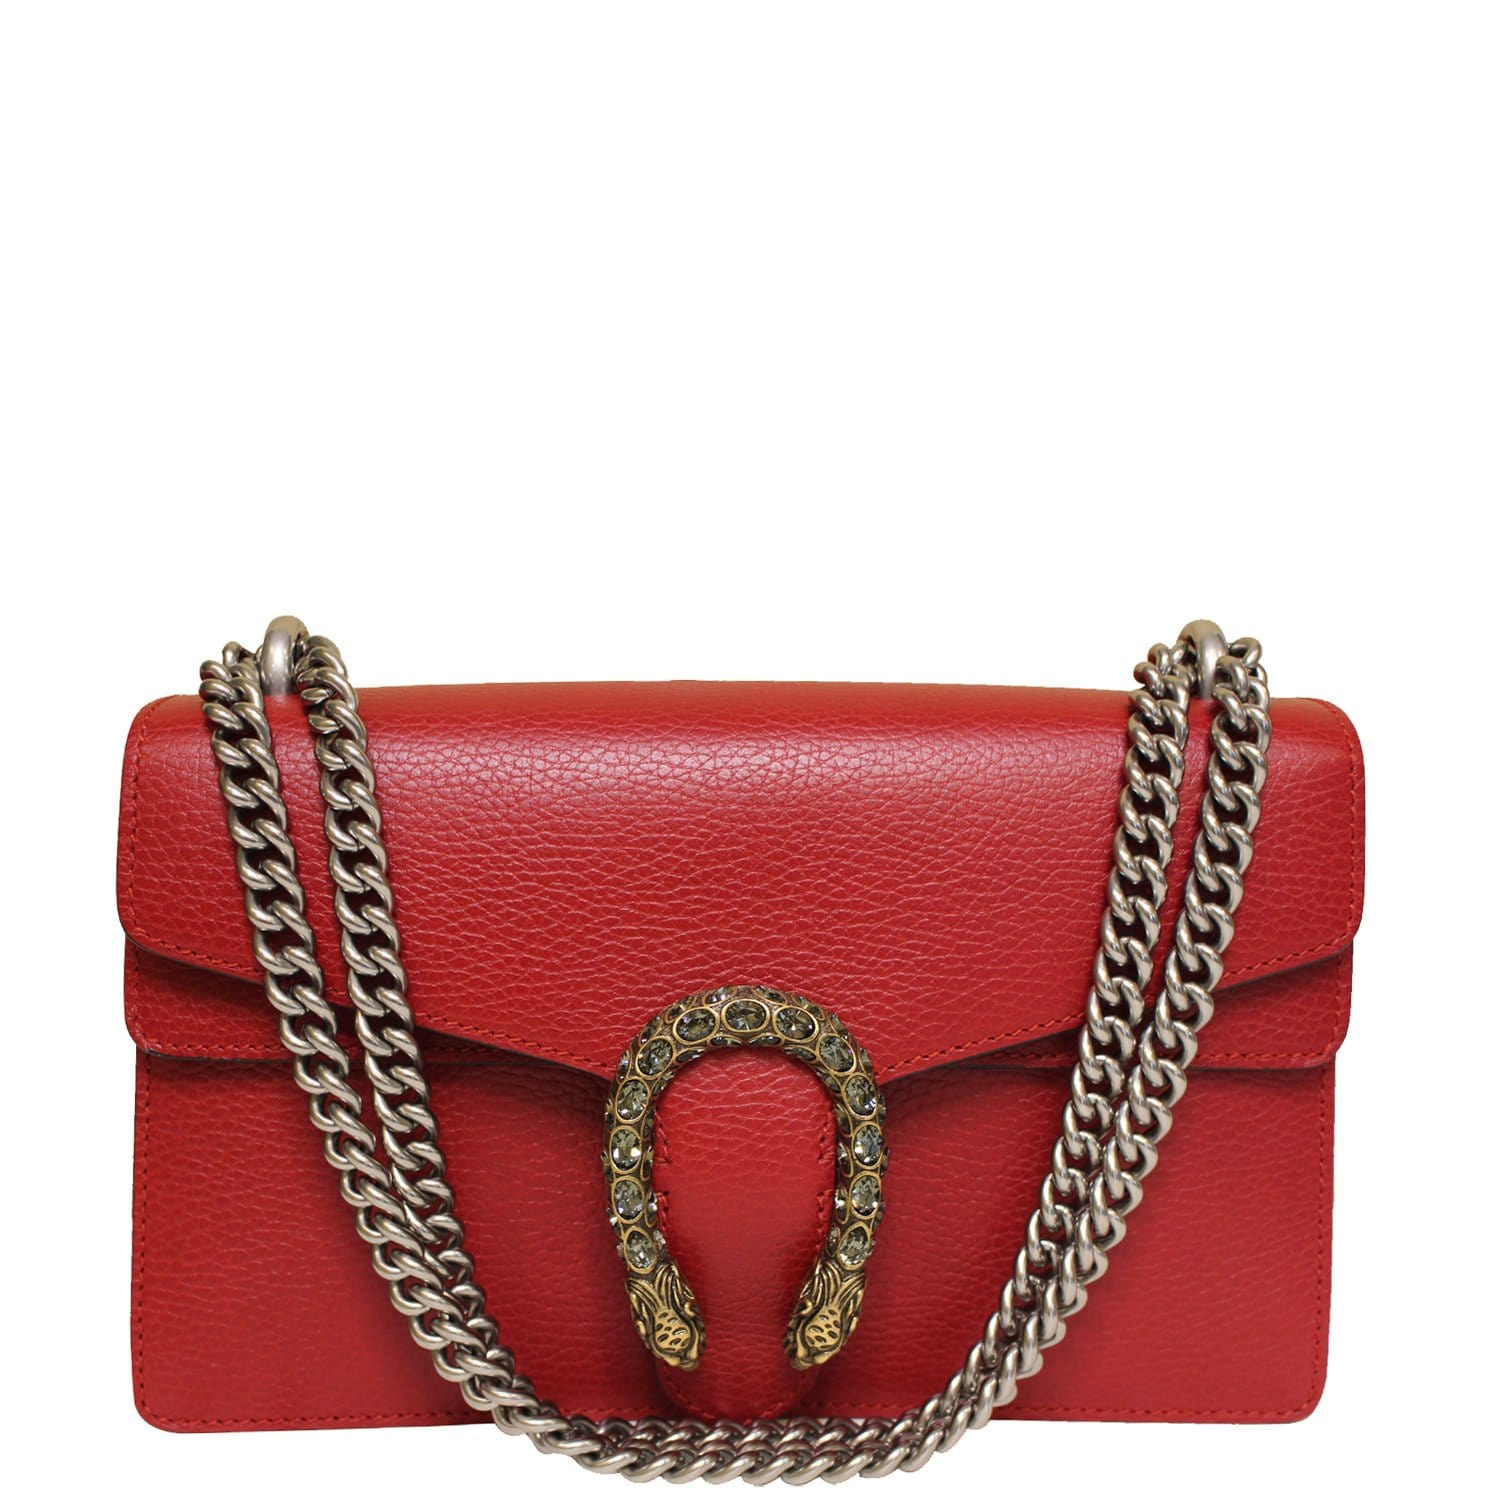 Gucci,Gucci GG Marmont Small Leather Shoulder Bag, Red - WEAR